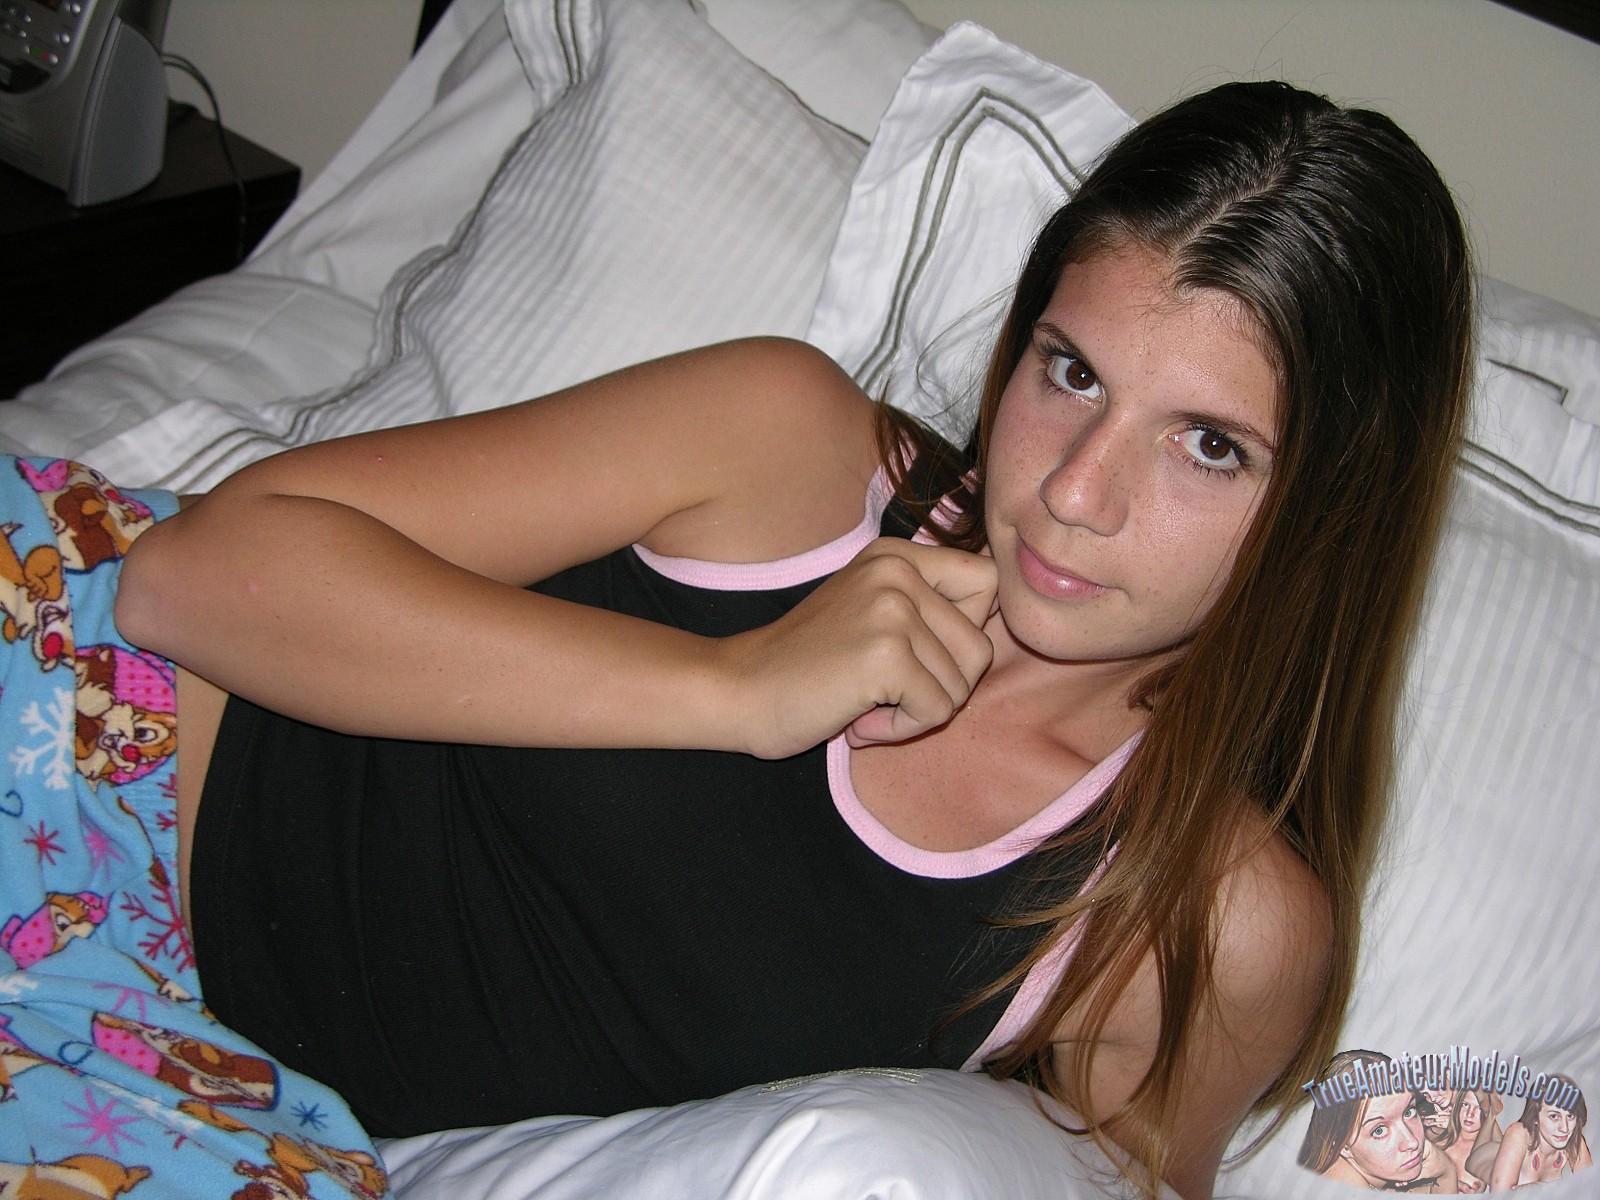 1600px x 1200px - Amateur Freckled Face Teen Strips Out Of Her Pajamas